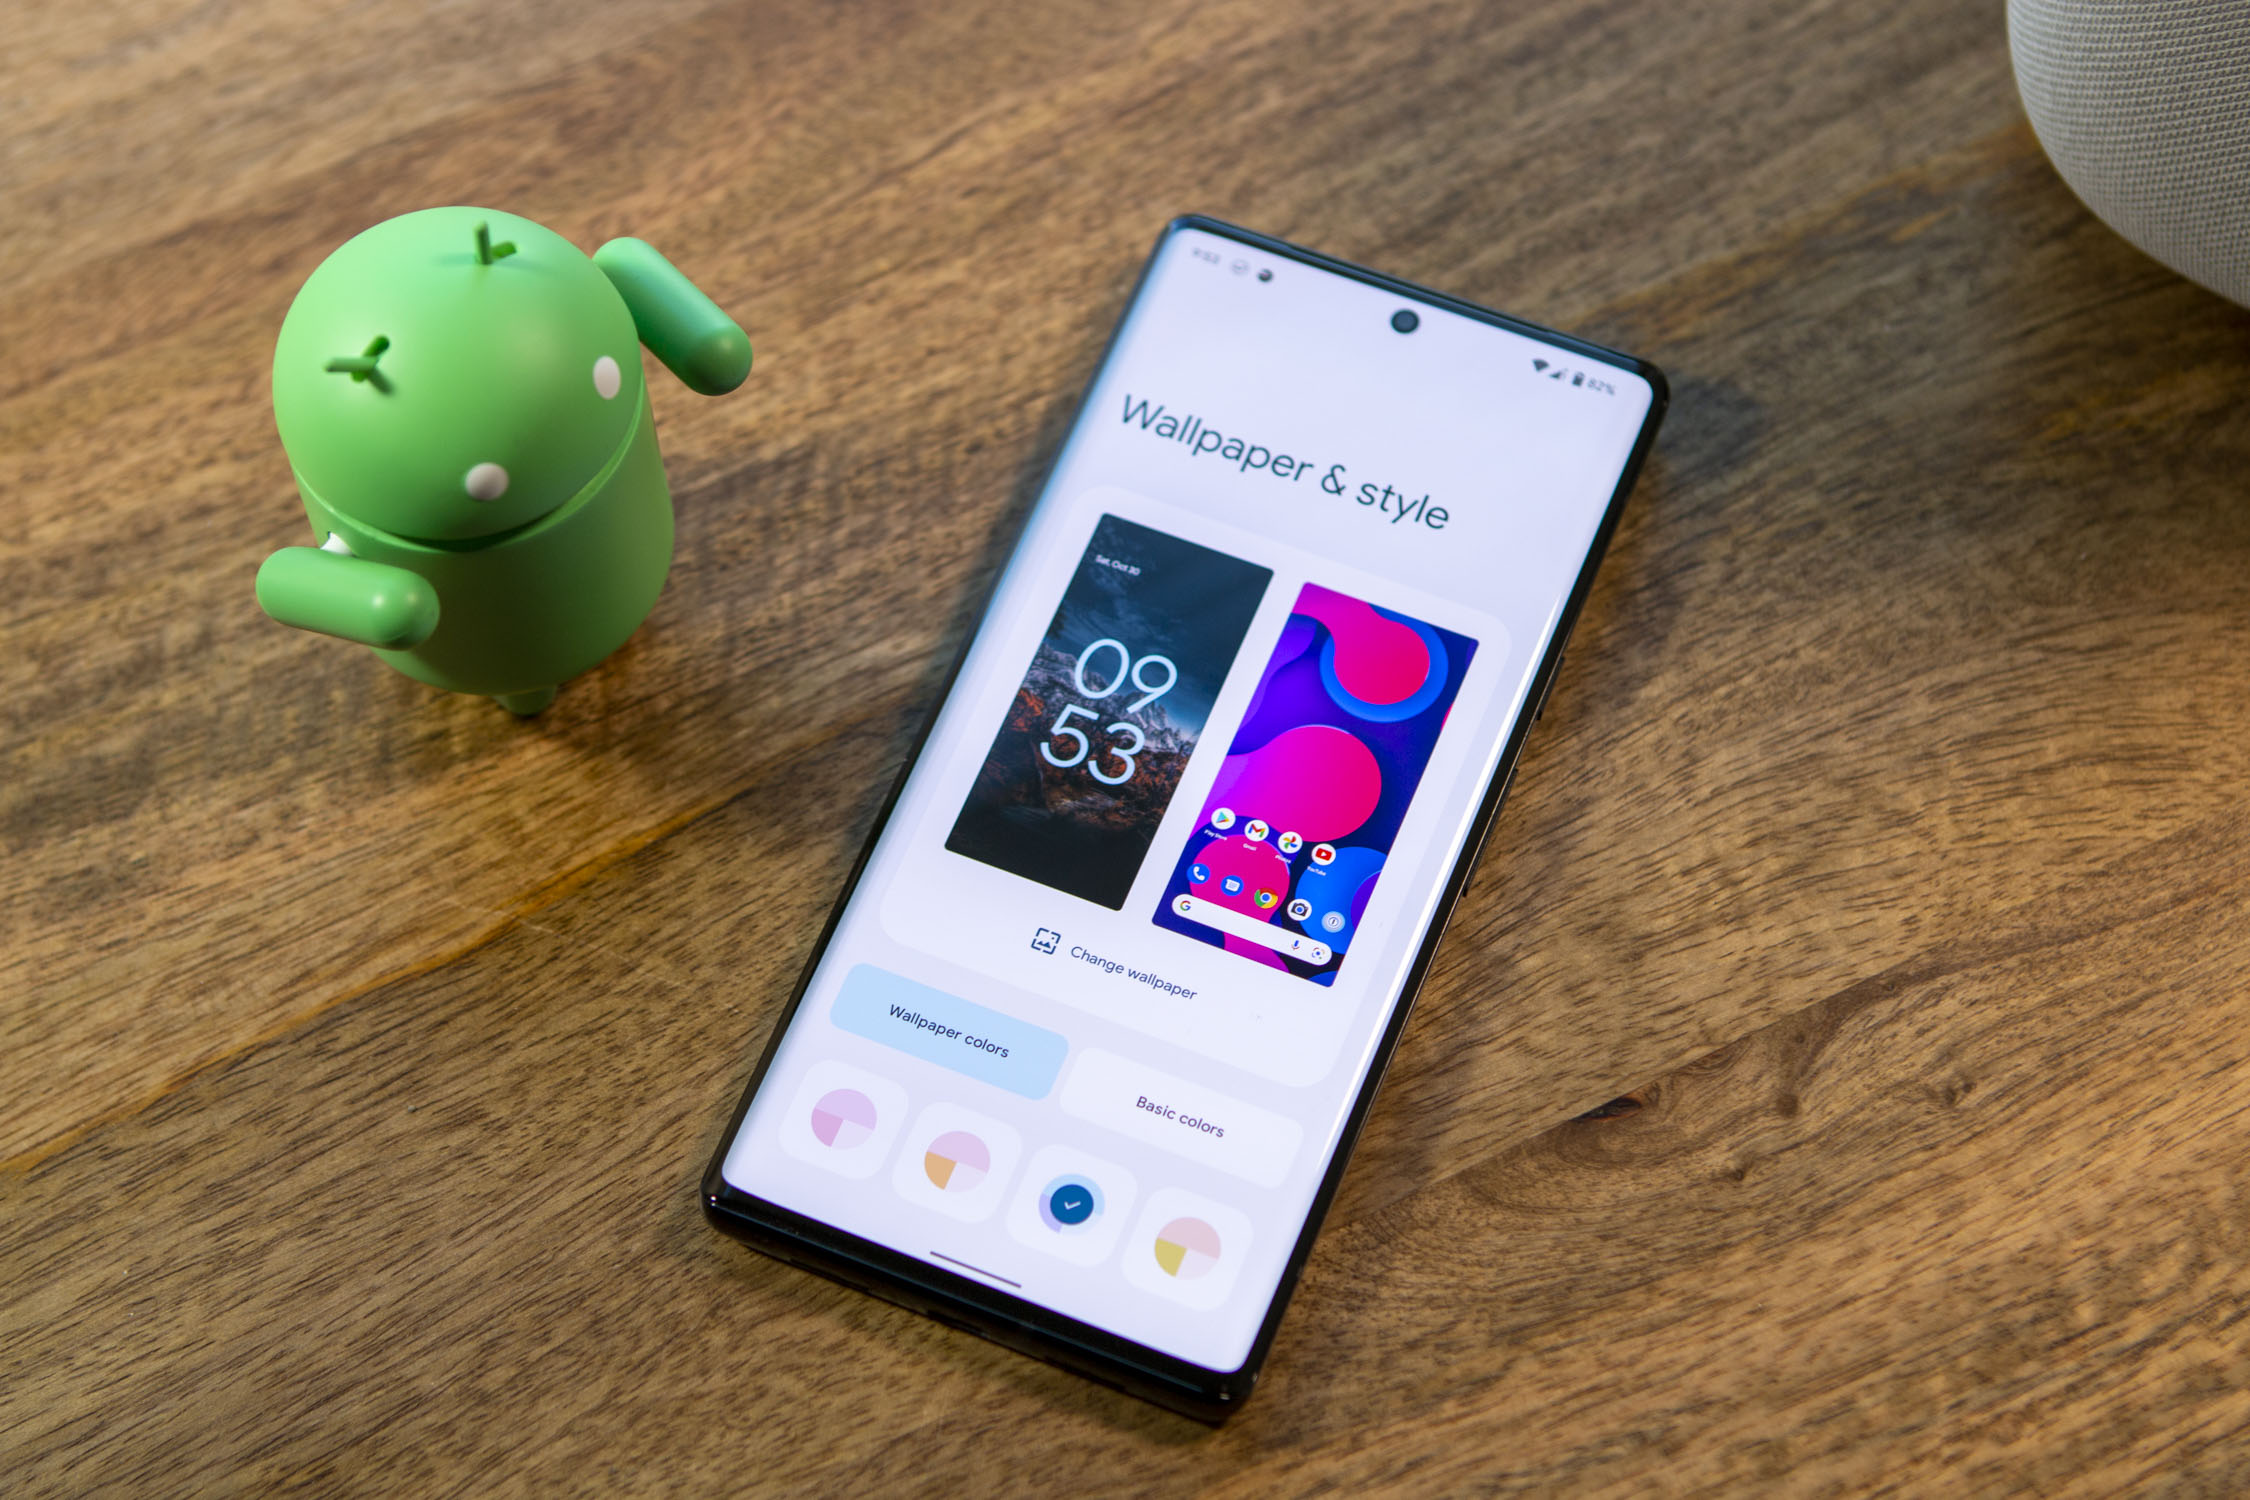 Google Pixel 6 tips: Make your new Pixel phone better with 10 easy